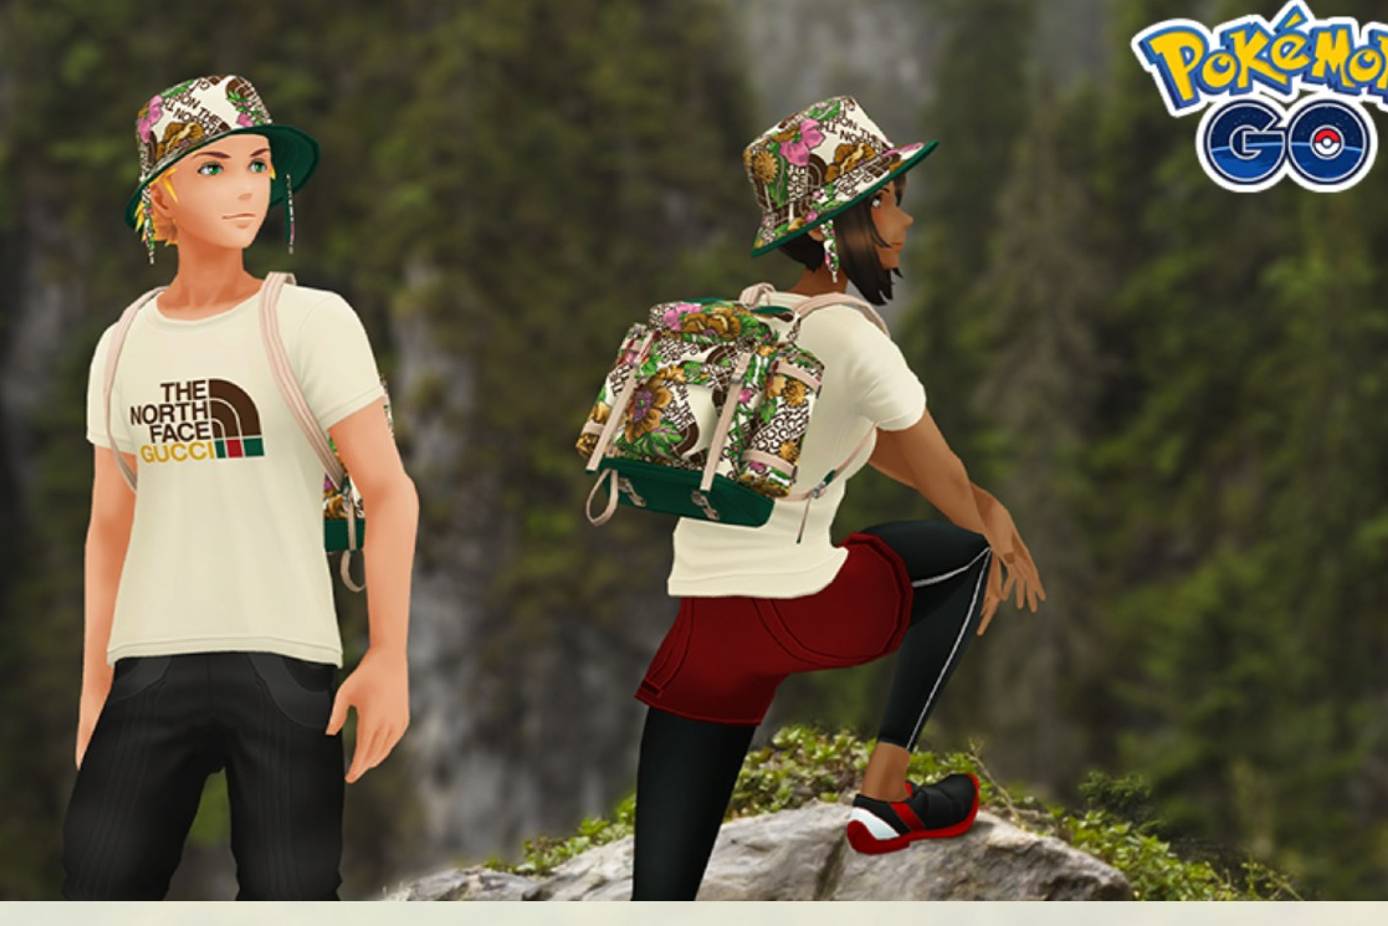 The North Face x Gucci Collection: avatar items now available in Pokémon GO